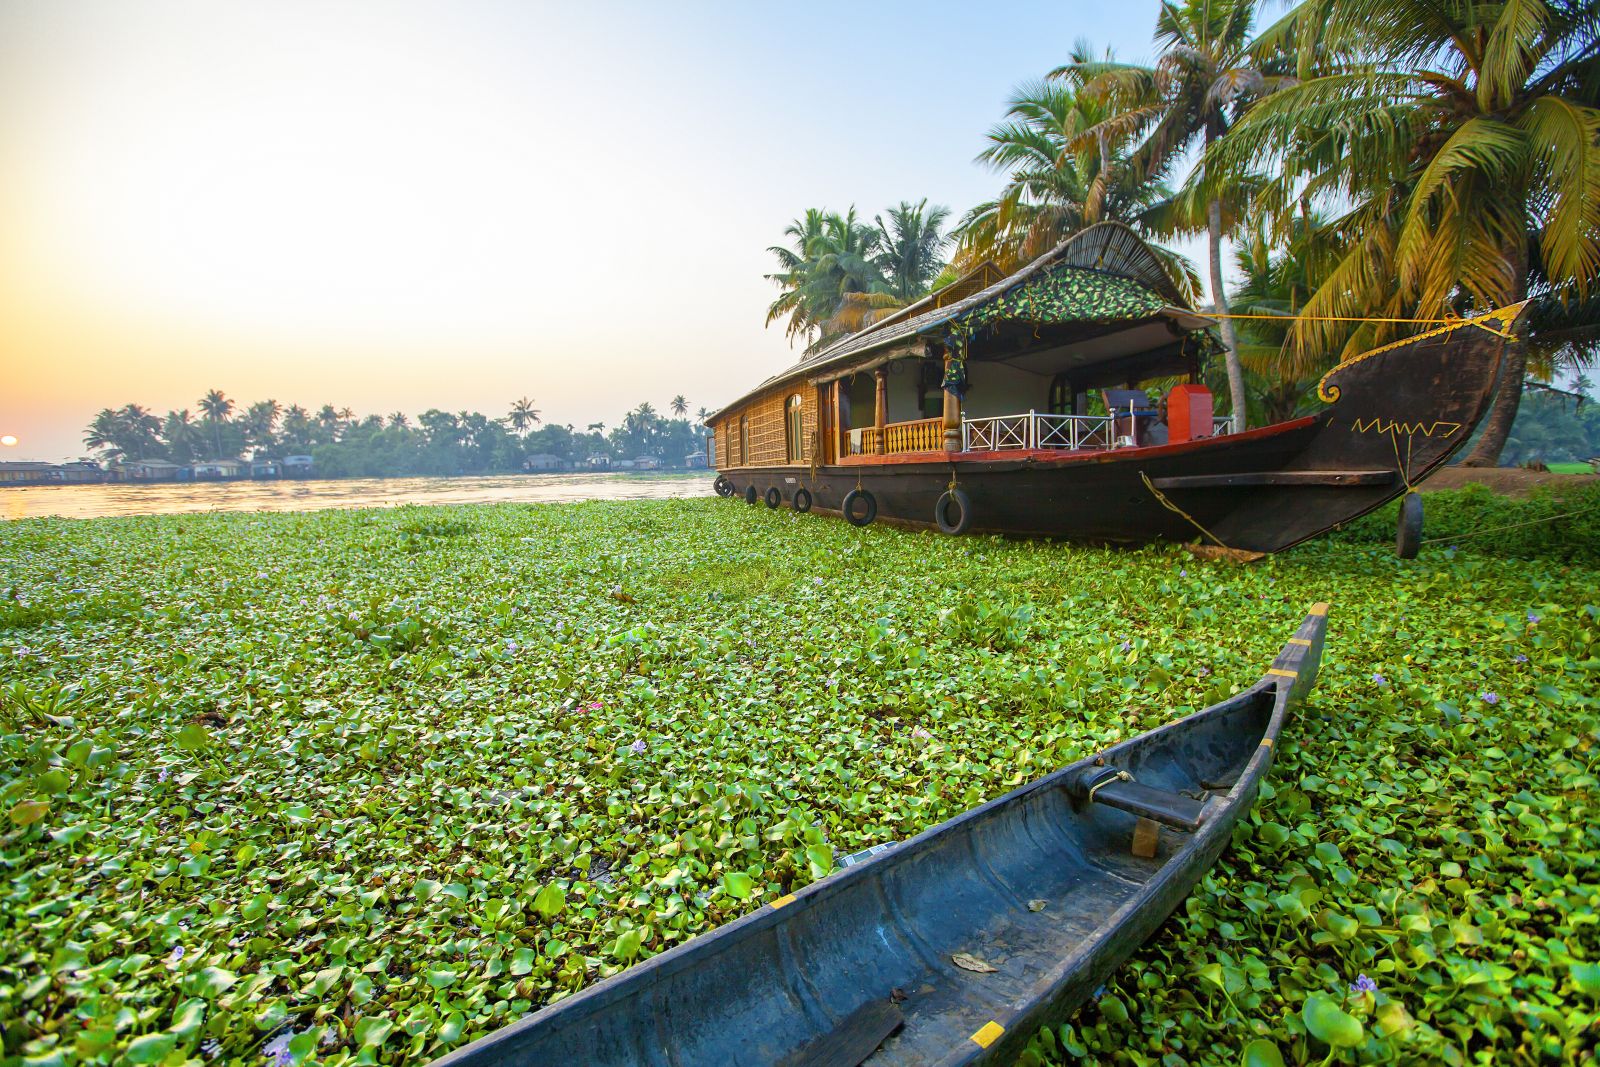 Rice barge and canoe in the backwaters of Kerala in India